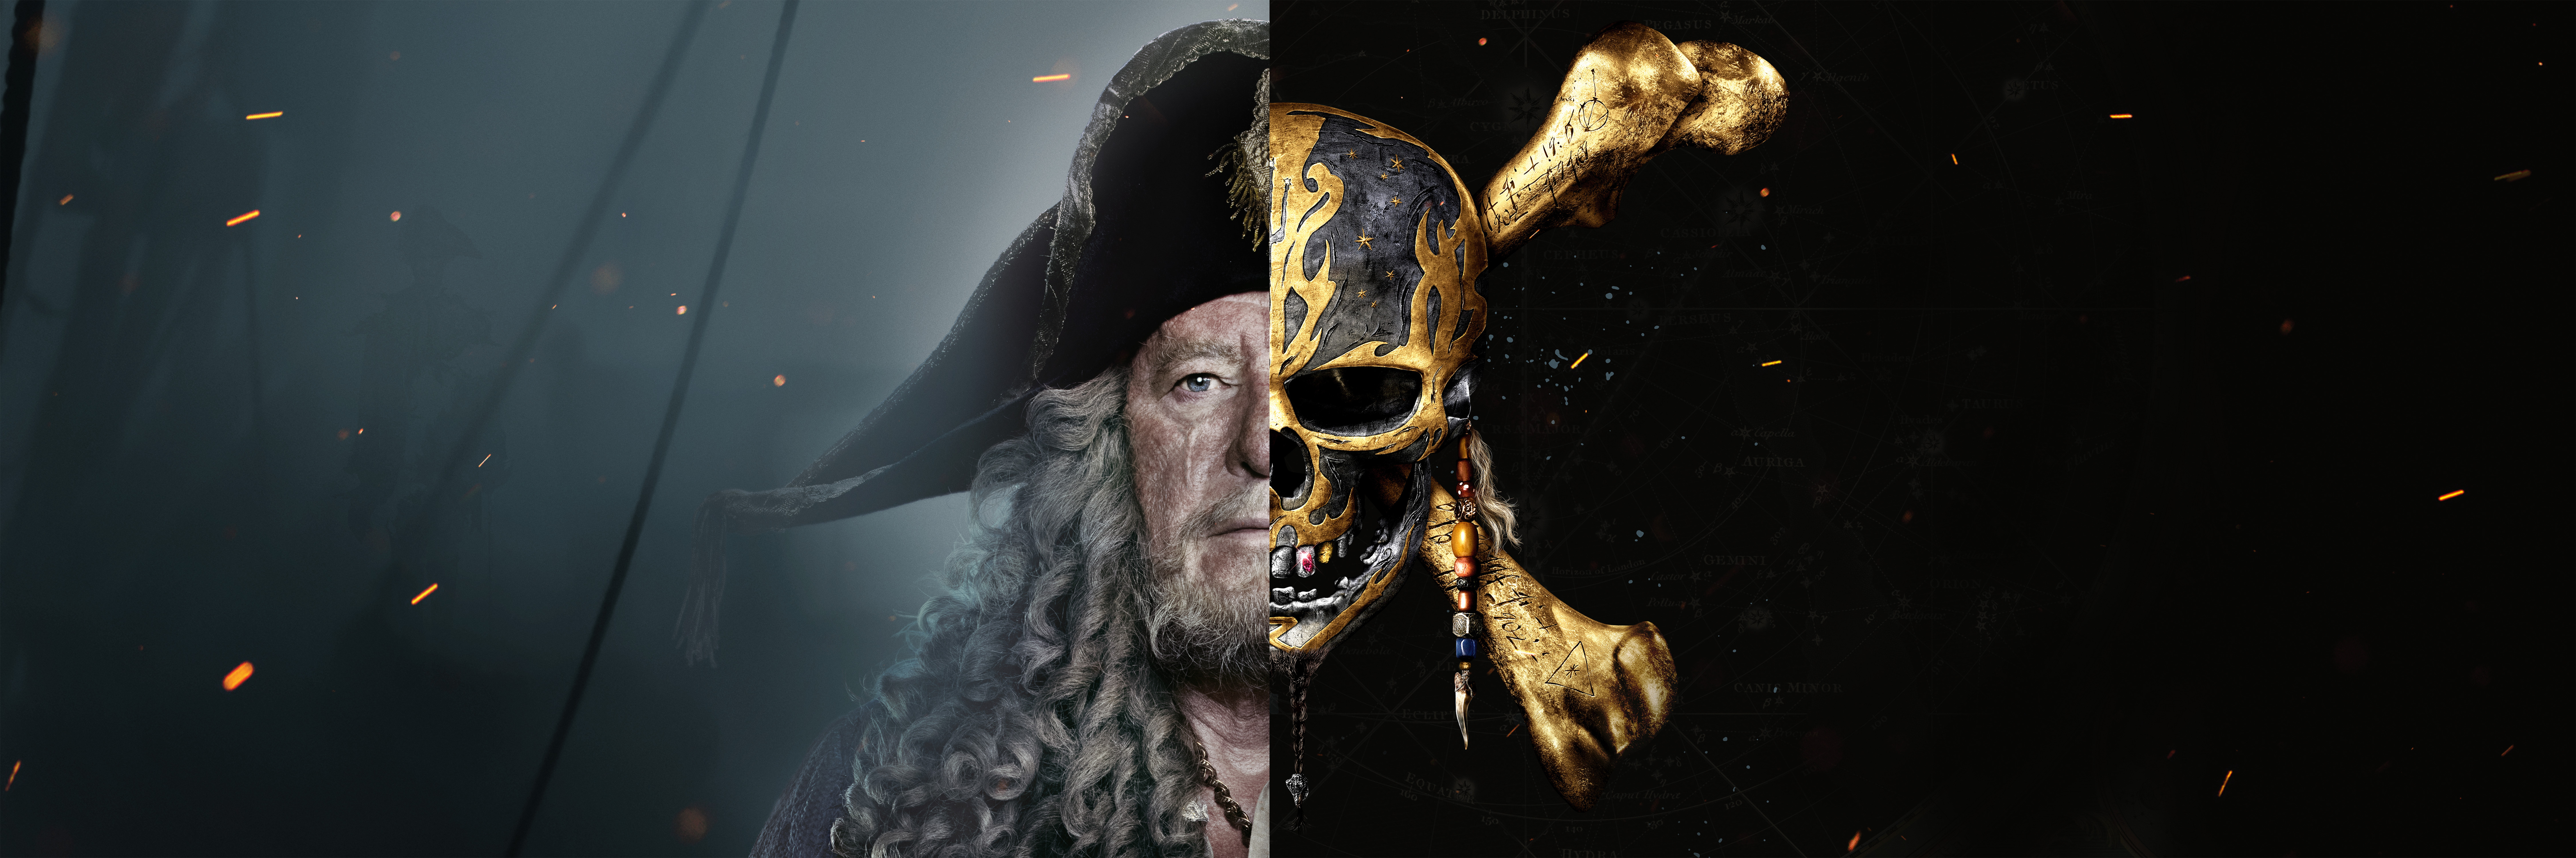 Movie Pirates Of The Caribbean: Dead Men Tell No Tales HD Wallpaper | Background Image